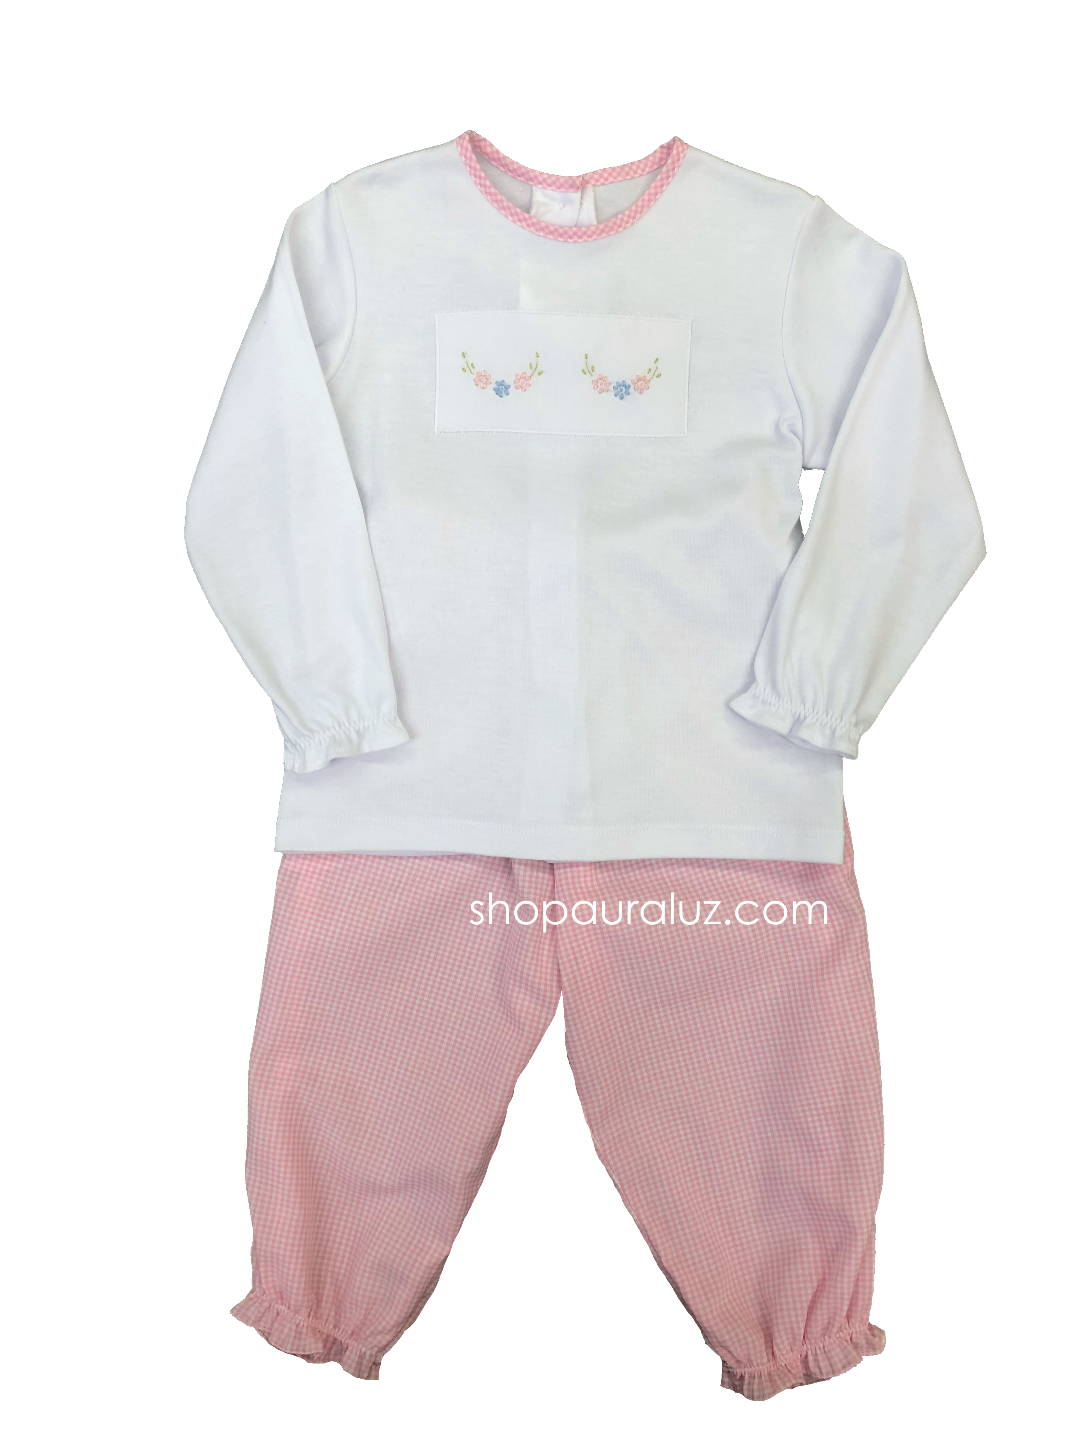 Auraluz 2pc Set...White l/s knit shirt with embroidered flowers and pink check pants